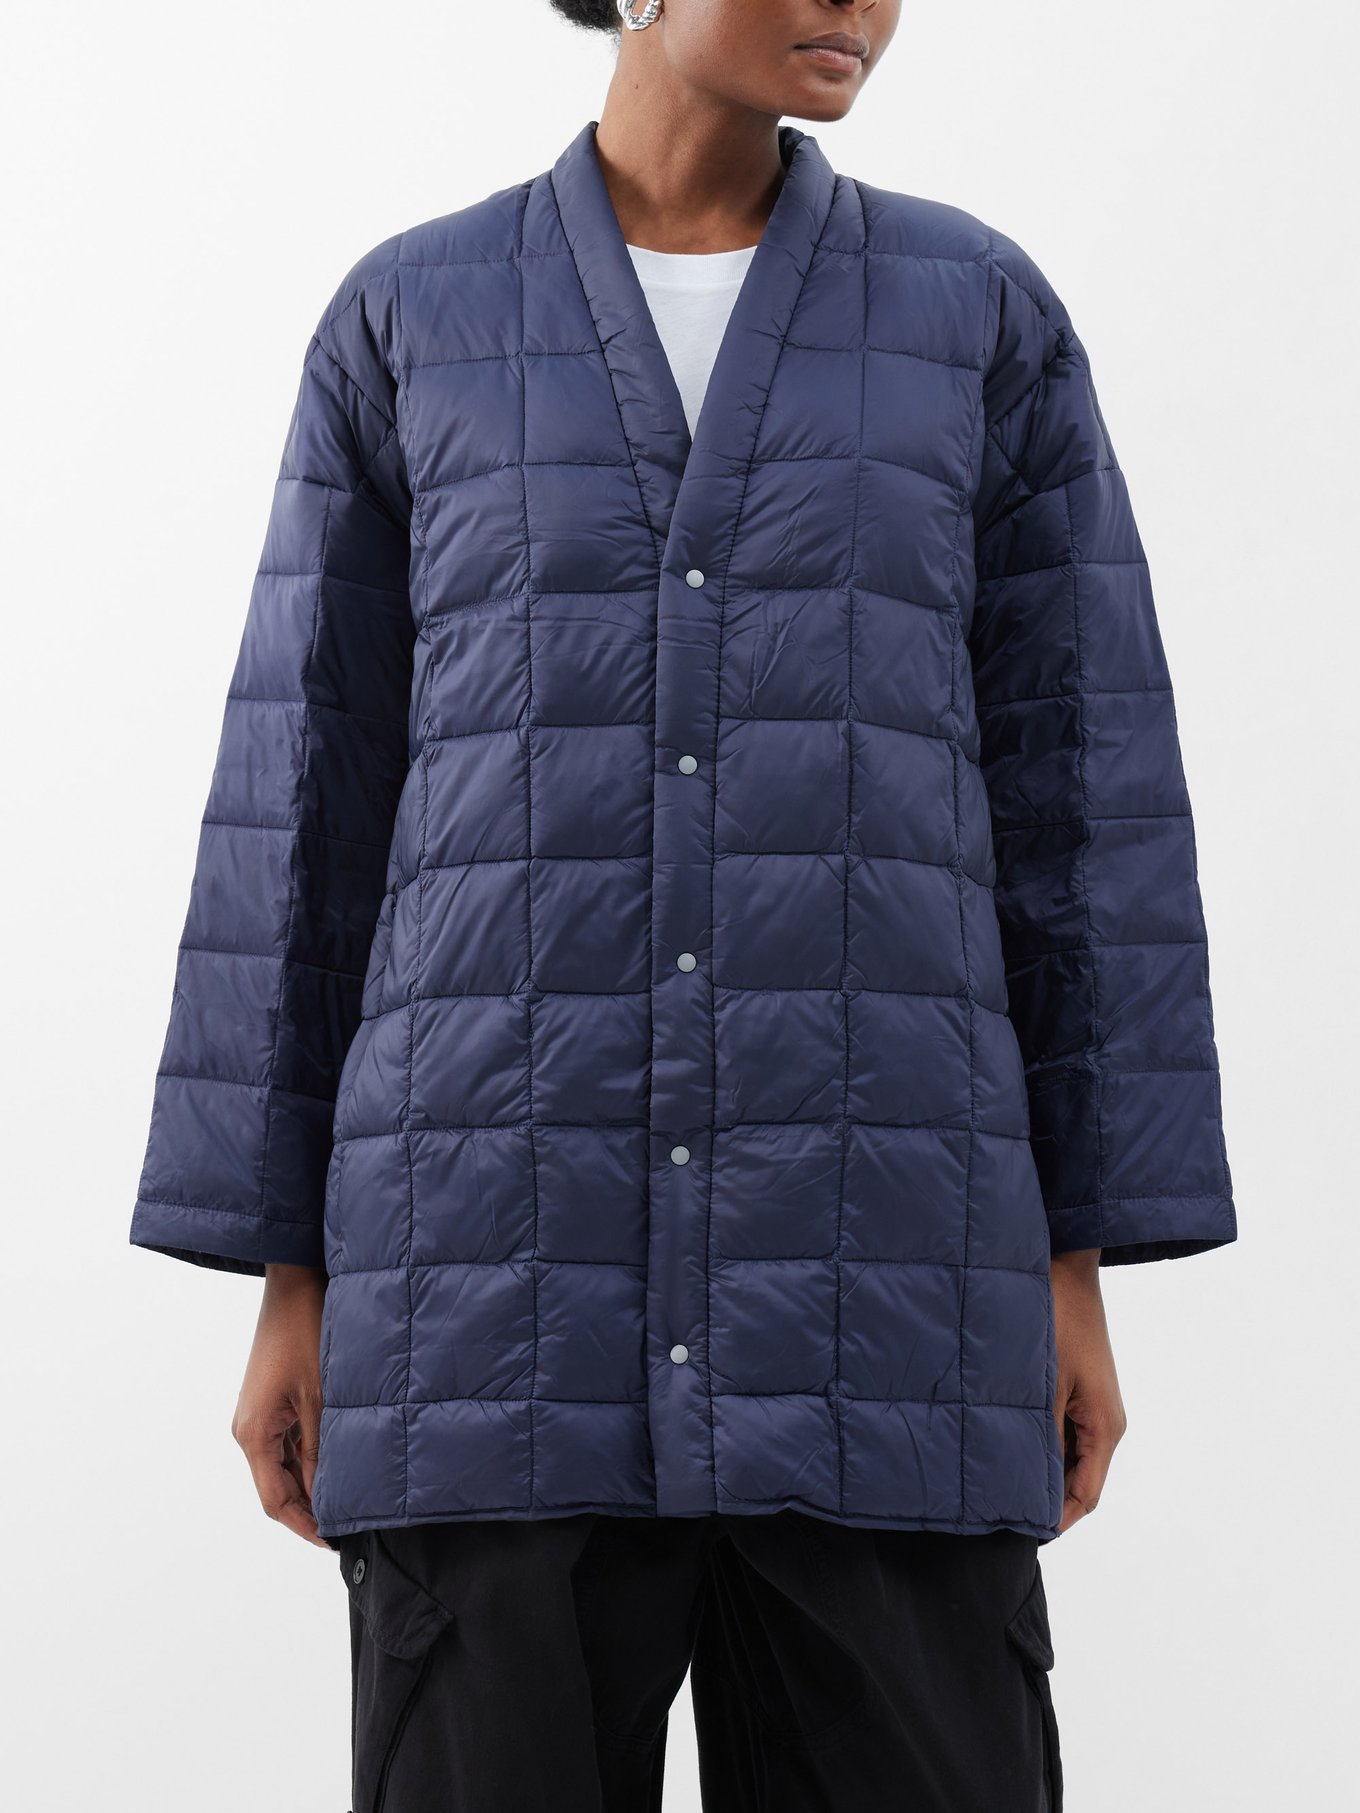 Navy Hanten quilted down jacket | US MATCHES TAION 